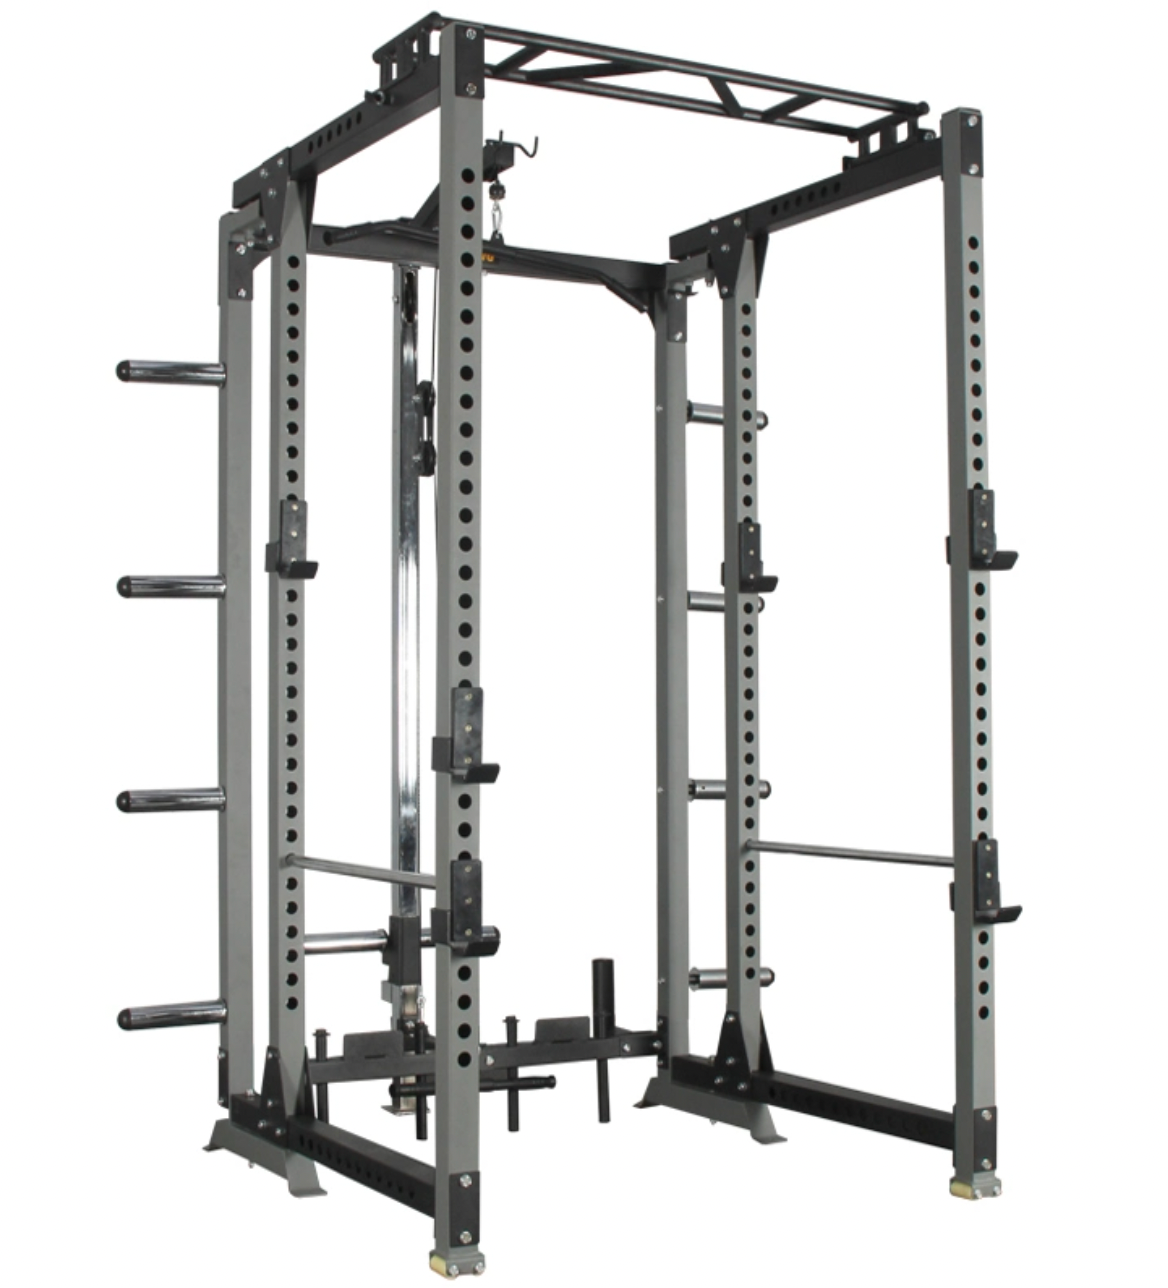 Max Reload All In One Folding Power Rack + Cable System - Fitness Hero Brand new